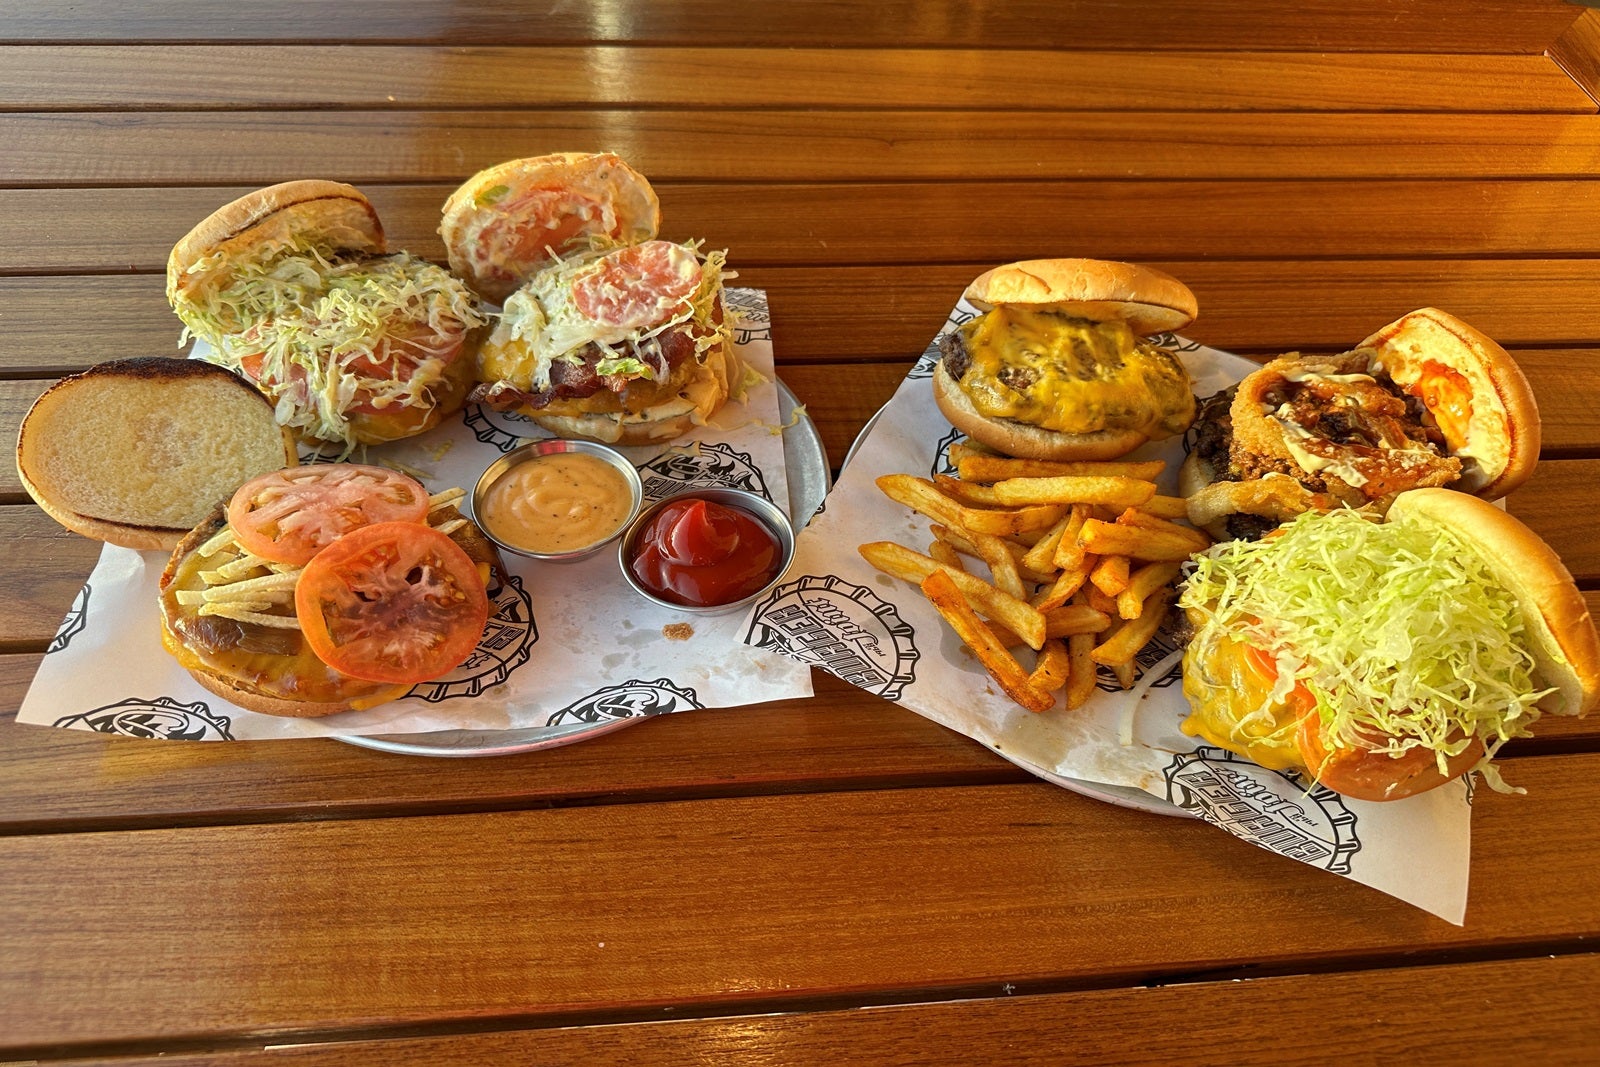 Guy’s Burger Joint, Carnival Cruise Line’s burger restaurant (with menu)